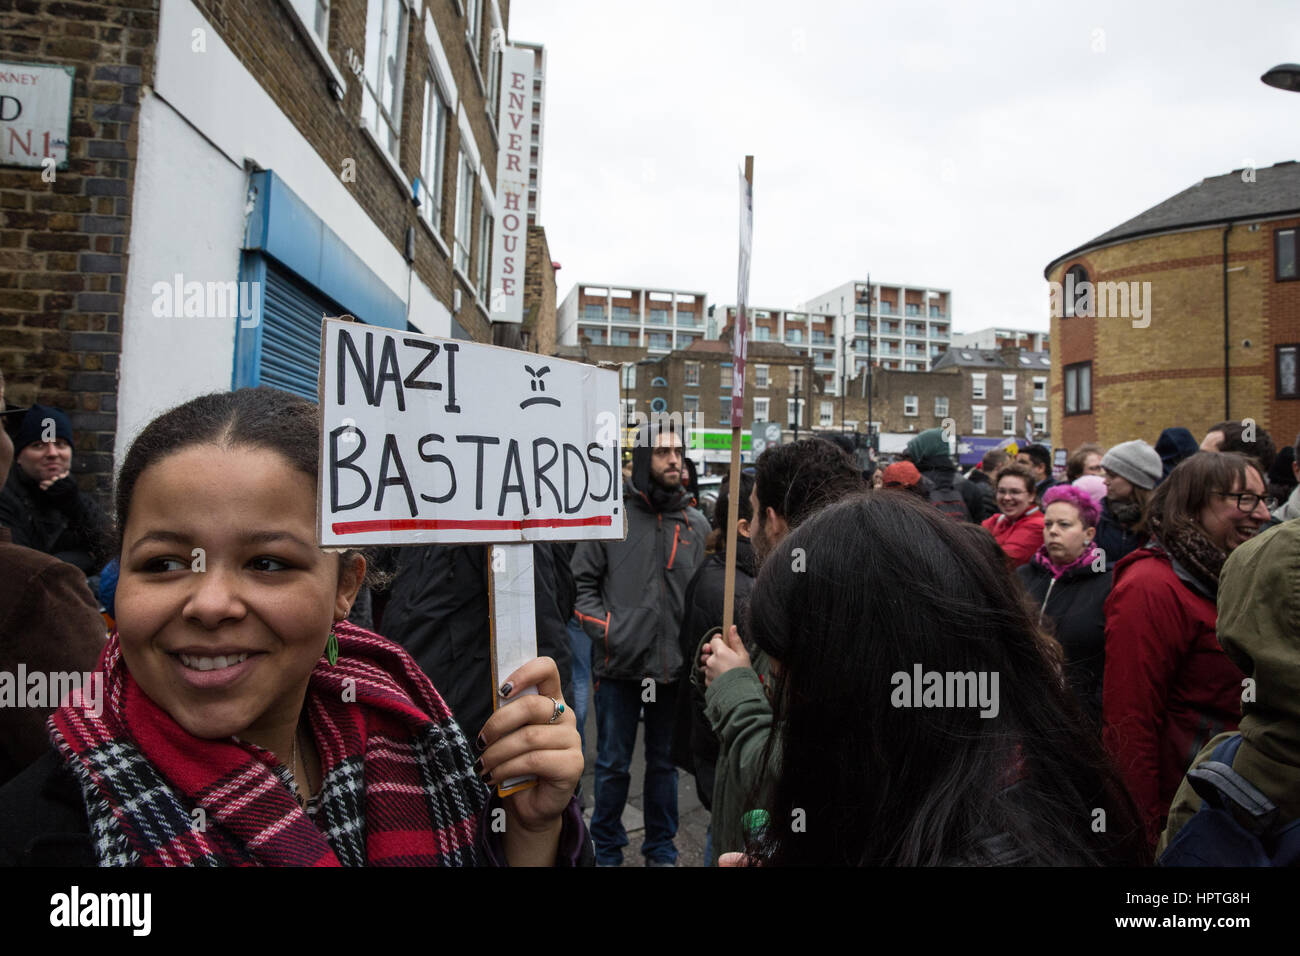 London, UK. 25th Feb, 2017. Anti-fascists protest outside the LD50 art gallery in Dalston against the hosting of an exhibition featuring neo-nazi artwork and openly racist speakers. Credit: Mark Kerrison/Alamy Live News Stock Photo